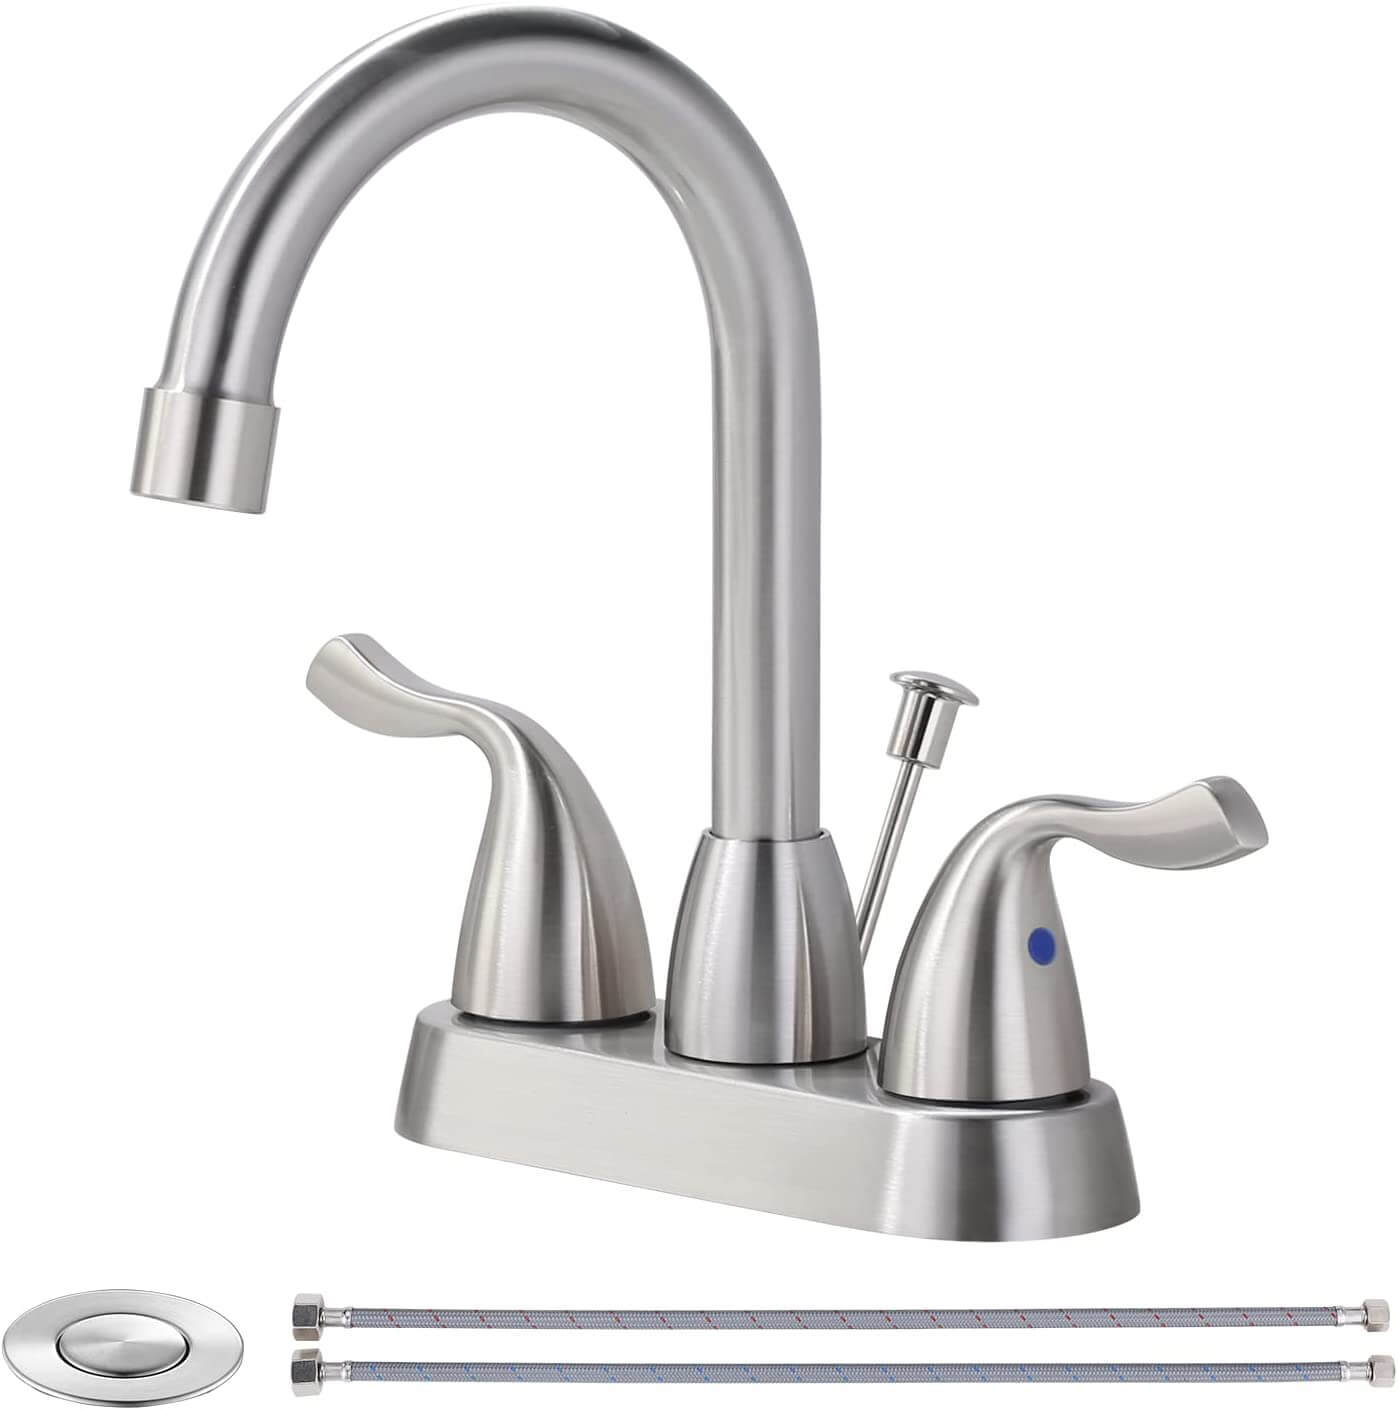 iVIGA Brushed Nickel 4 Inch Centerset Bathroom Sink Faucet with Drain Assembly and Supply Hoses